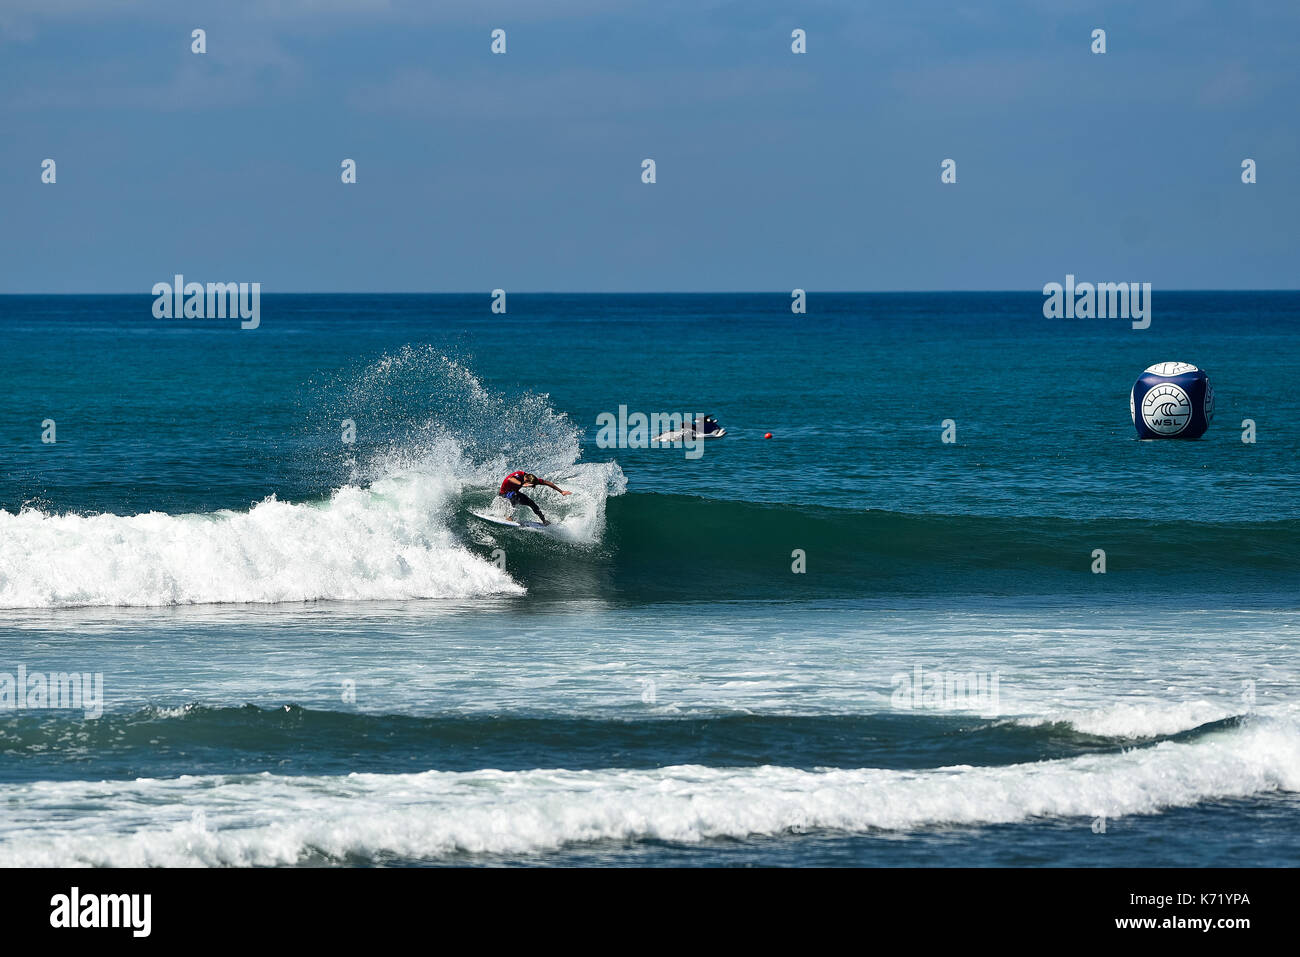 San Clemente, USA. 13 September, 2017.  Surfers compete head to head during the 2017 Hurley Pro surf contest at Lower Trestles, San Onofre State Park, CA. Surfer: Adrian Buchan (AUS). Credit: Benjamin Ginsberg/Alamy Live News. Stock Photo